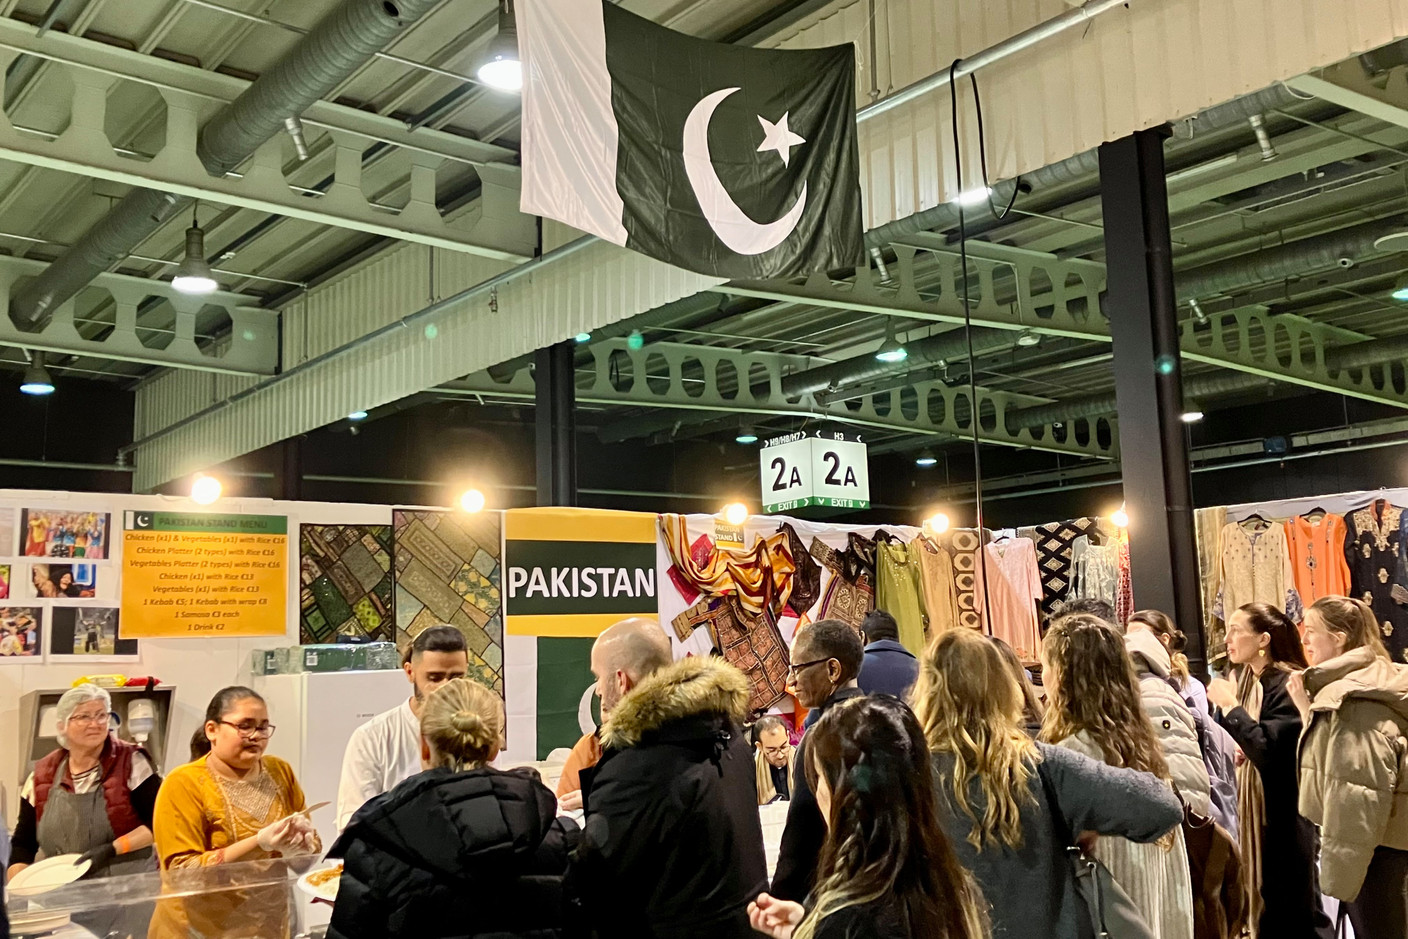 The menu at the Pakistan stand included chicken and vegetable platters, kebab and samosas. Photo: Lydia Linna/Maison Moderne